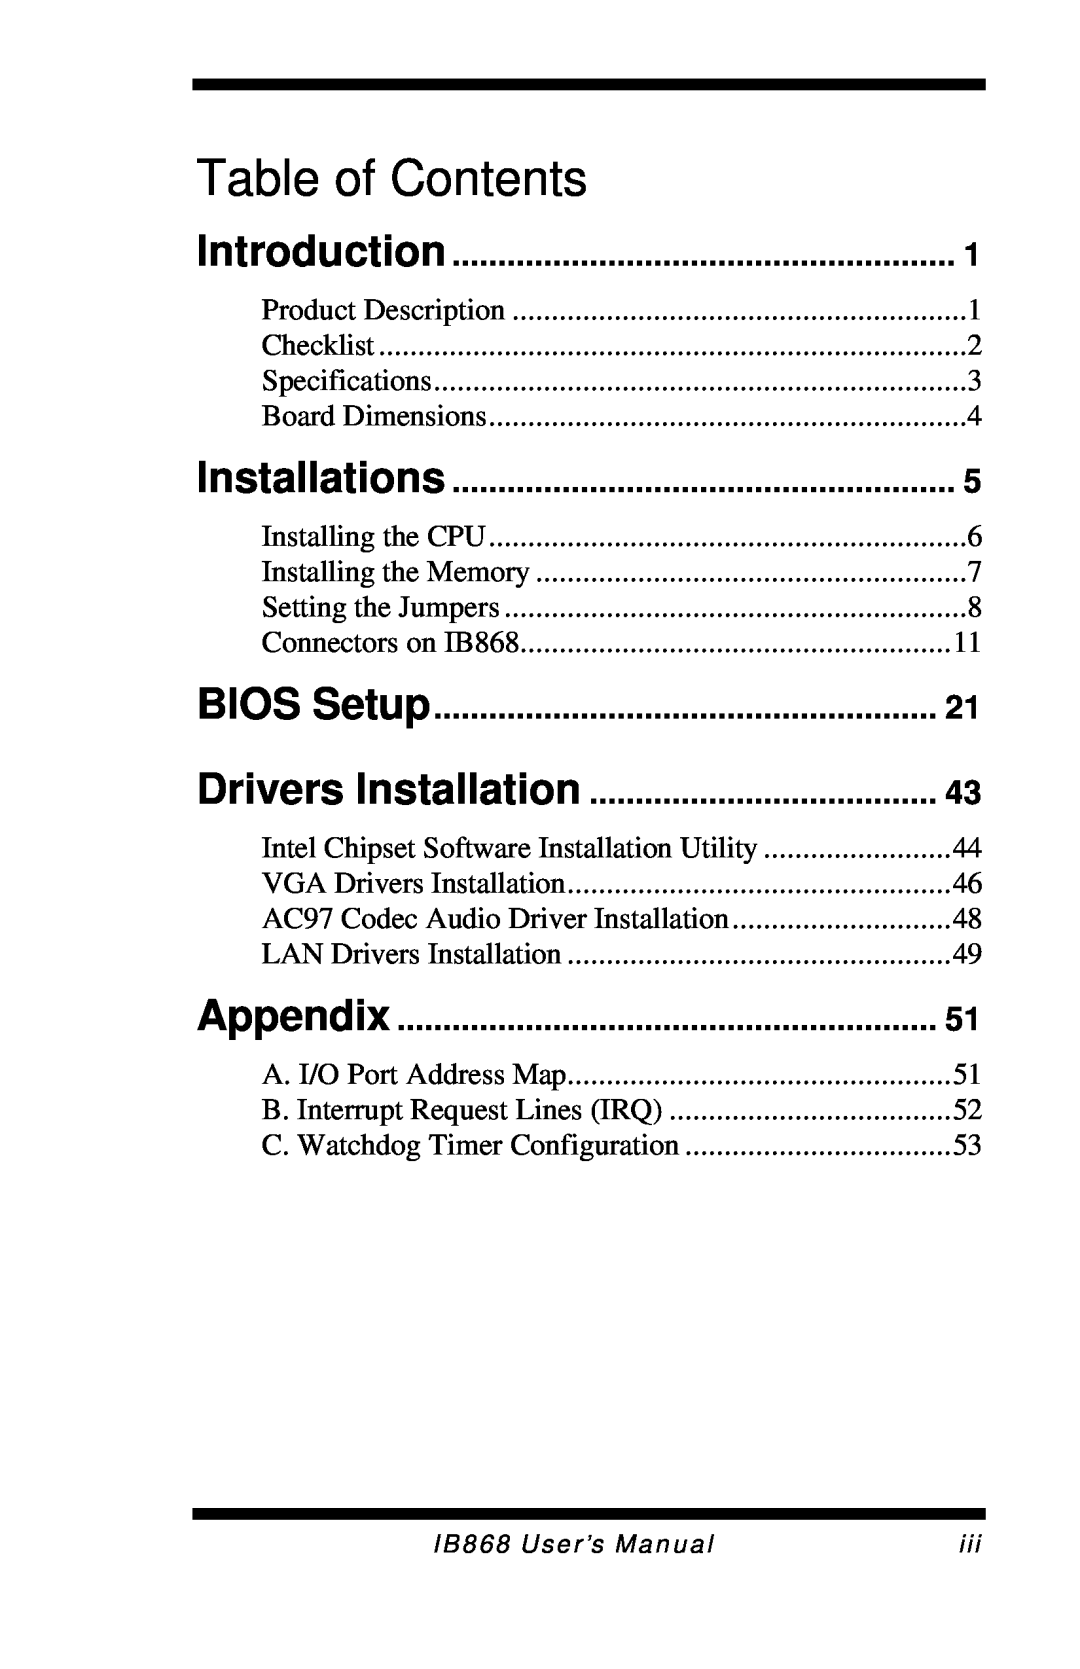 Intel IB868 user manual Introduction, Installations, BIOS Setup, Drivers Installation, Appendix, Table of Contents 